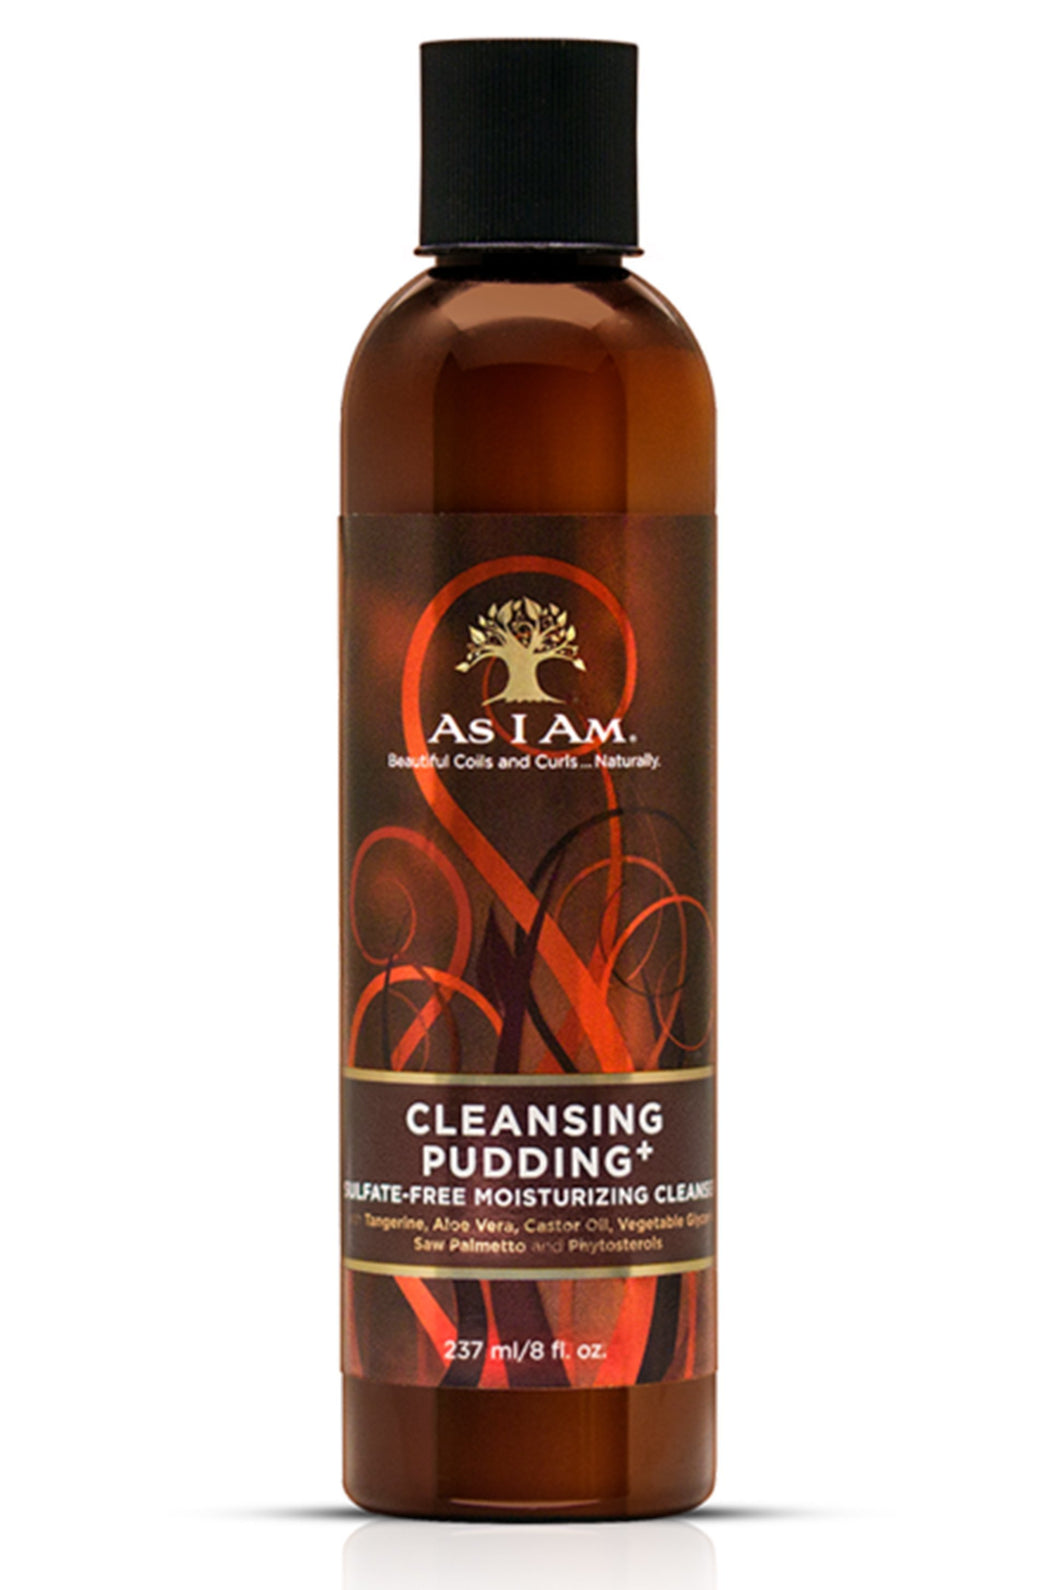 AS I AM Cleansing Pudding Moisturising Cleanser product bottle